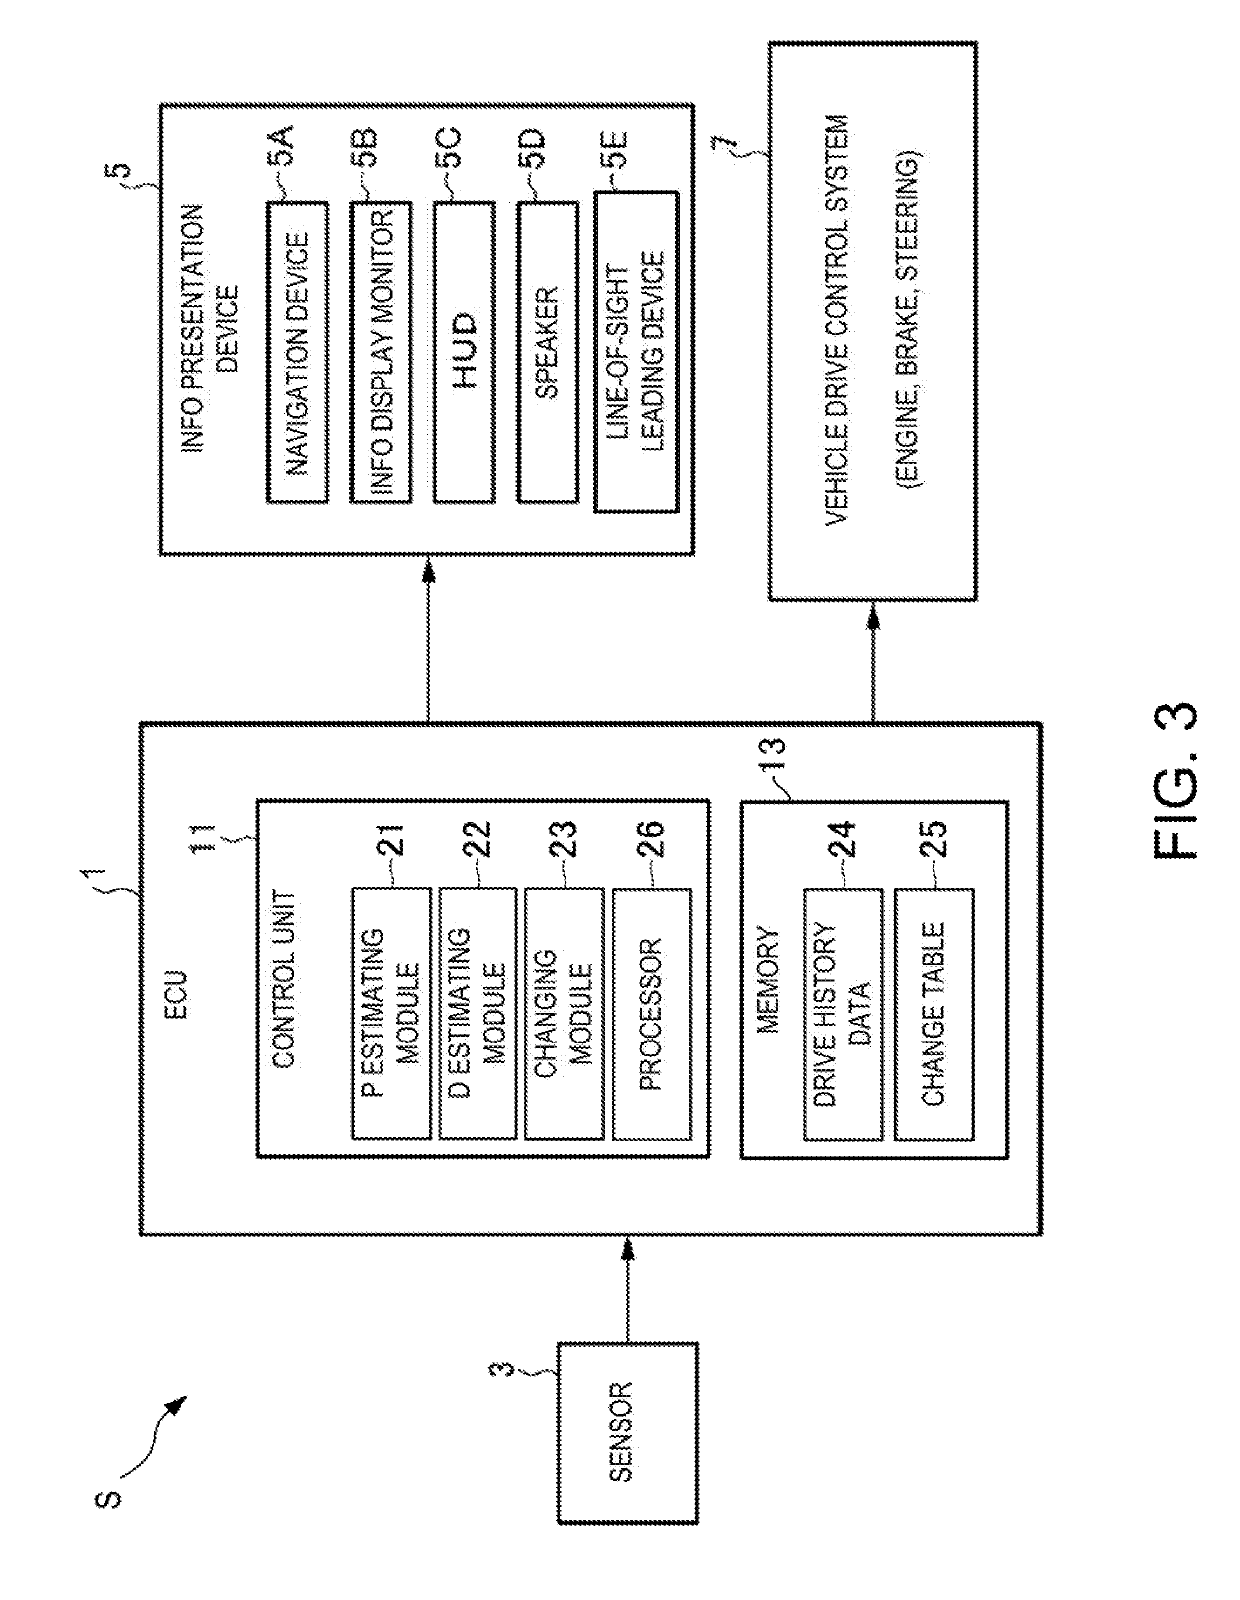 Vehicle drive assistance system